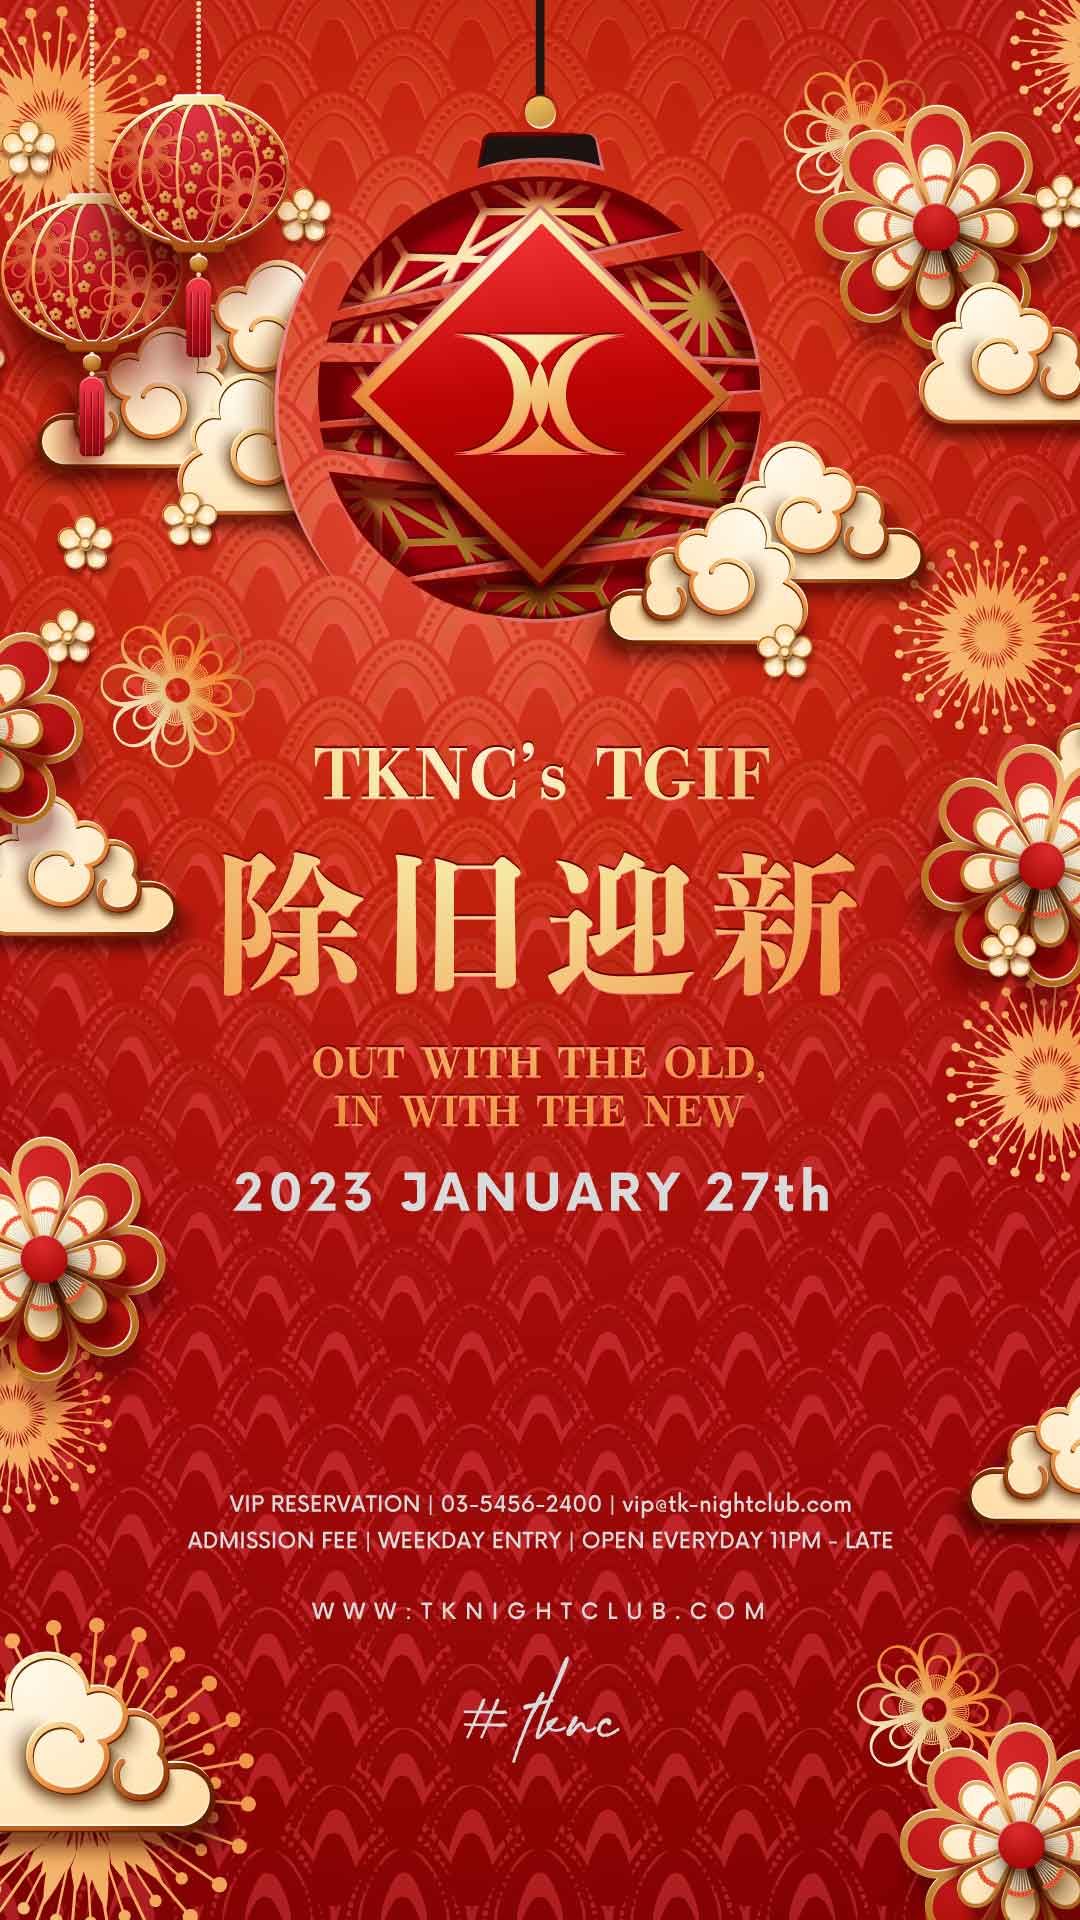 TKNC,s TGIF 除旧迎新 OUT WITH THE OLD, IN WITH THE NEW AFTER MOVIE